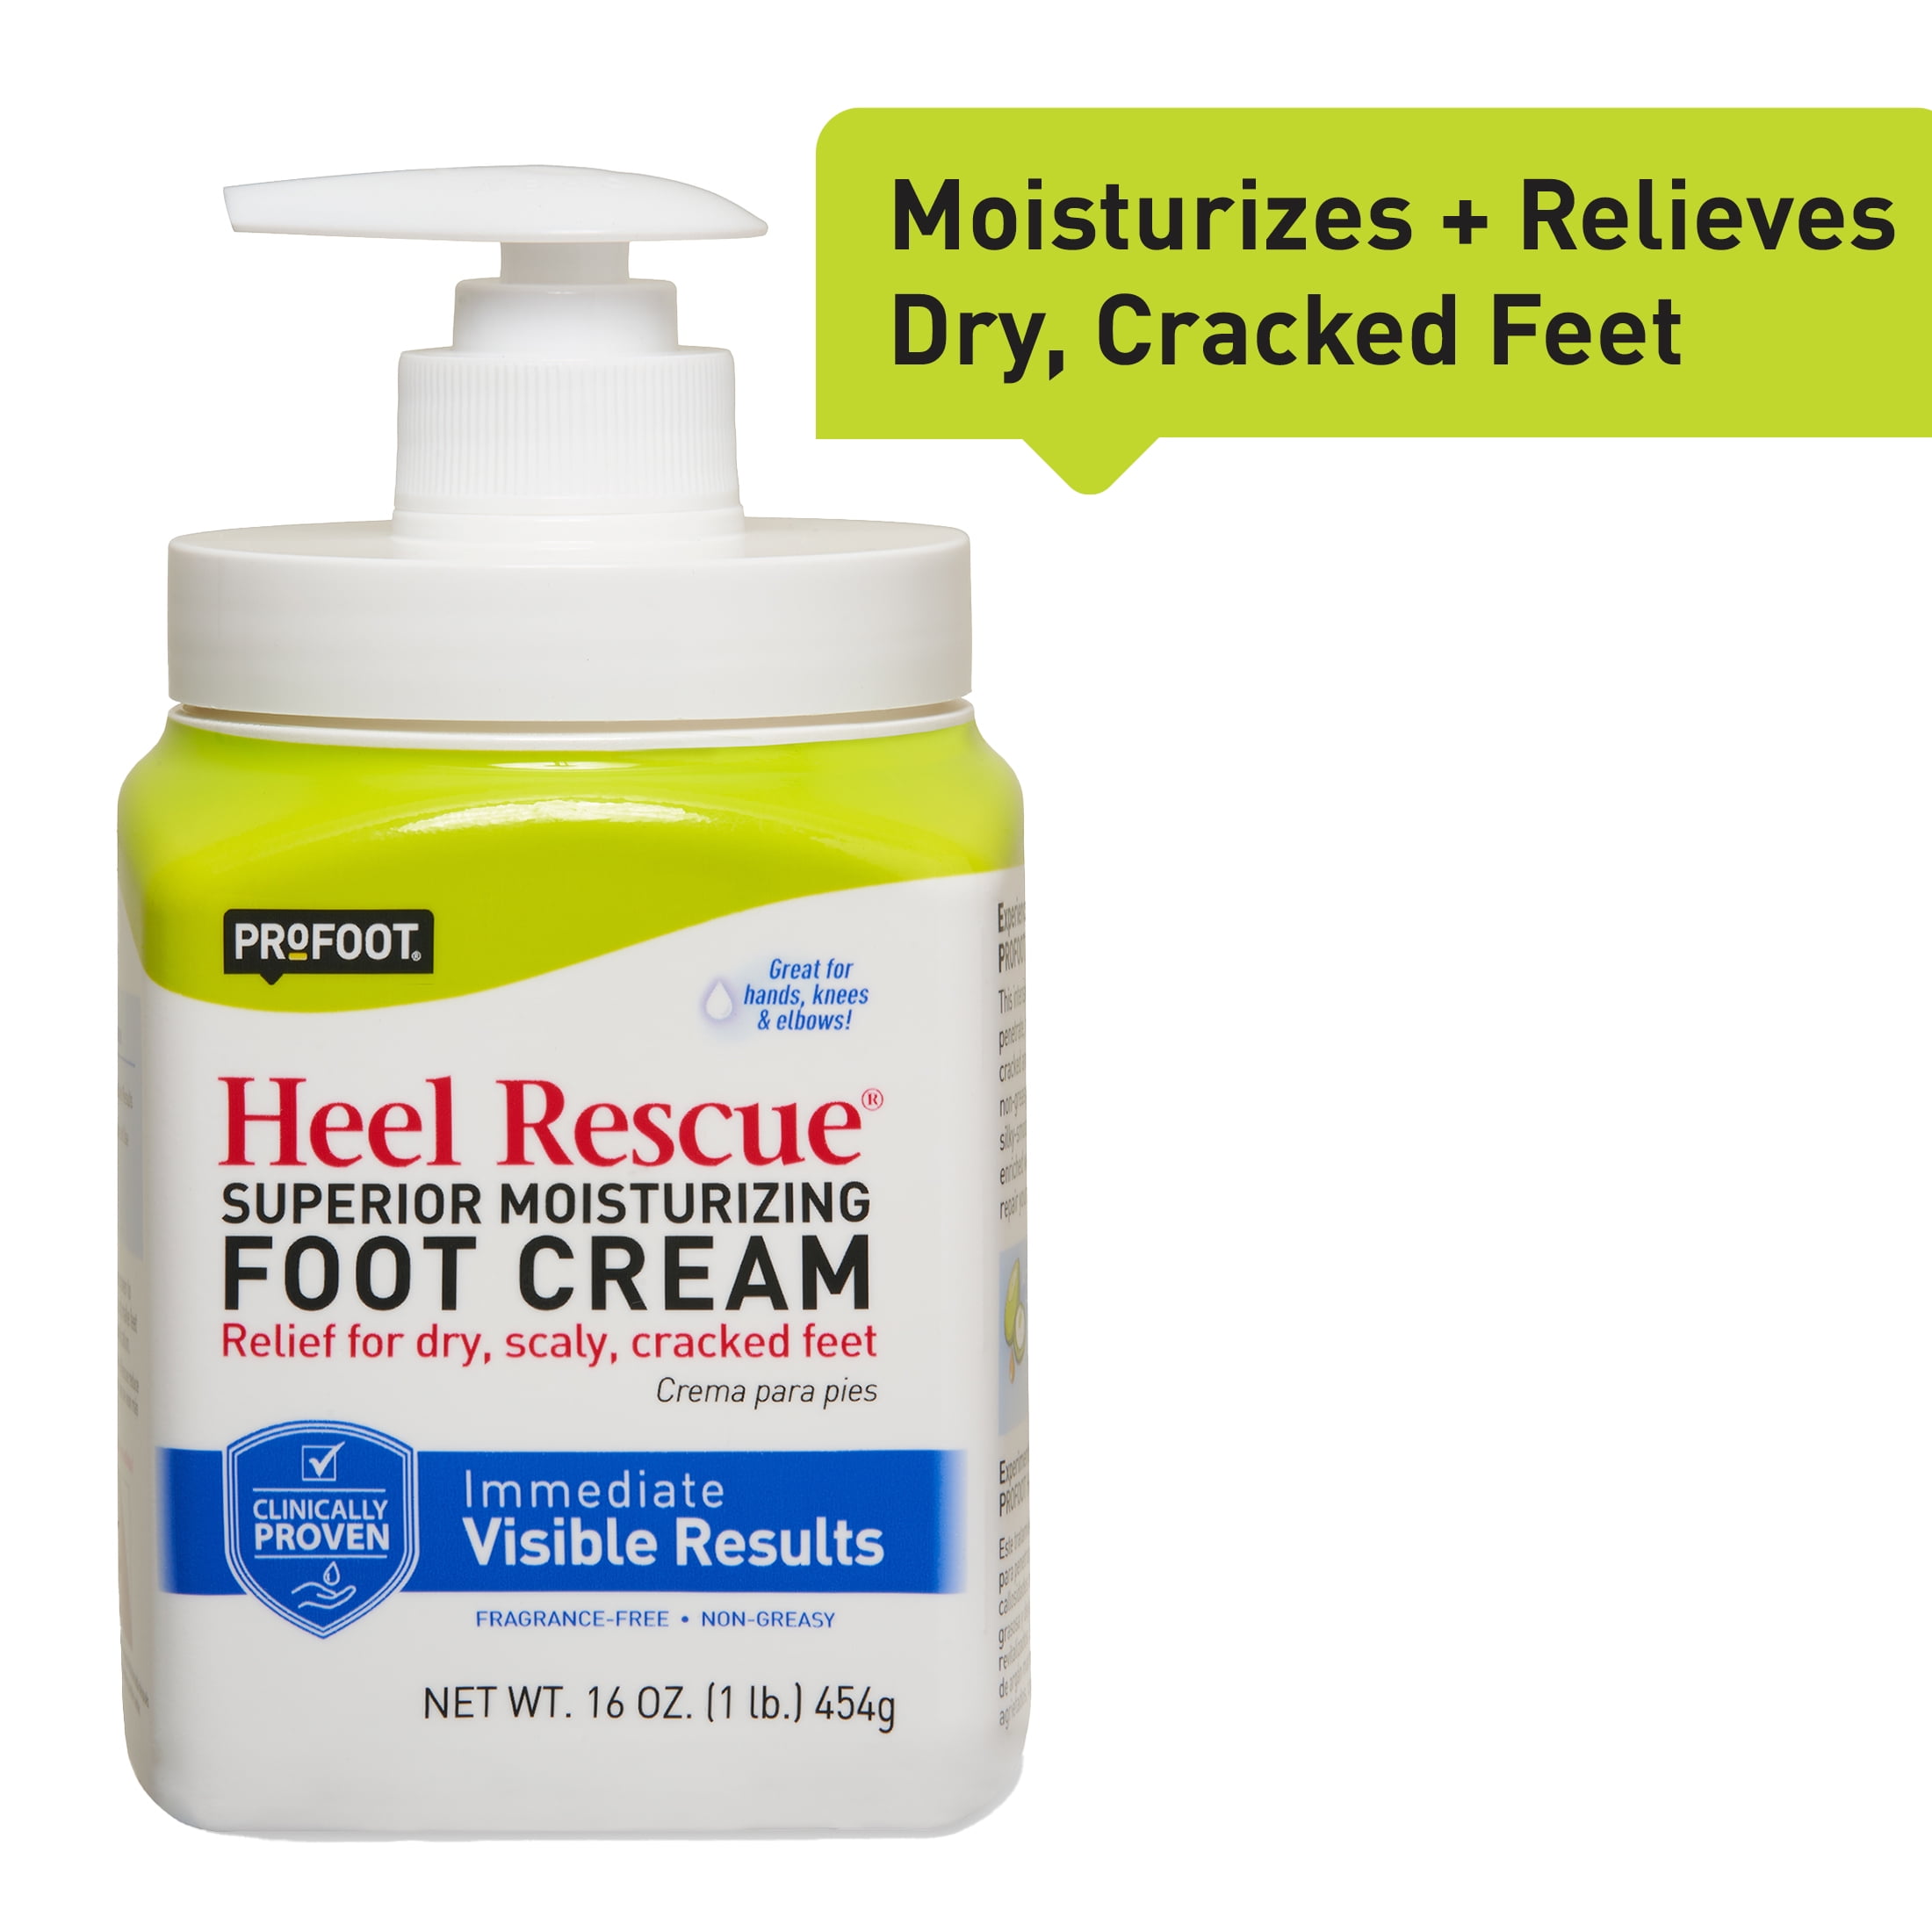 PROFOOT Heel Rescue Foot Cream for Cracked, Calloused, or Chapped Skin, 16 oz